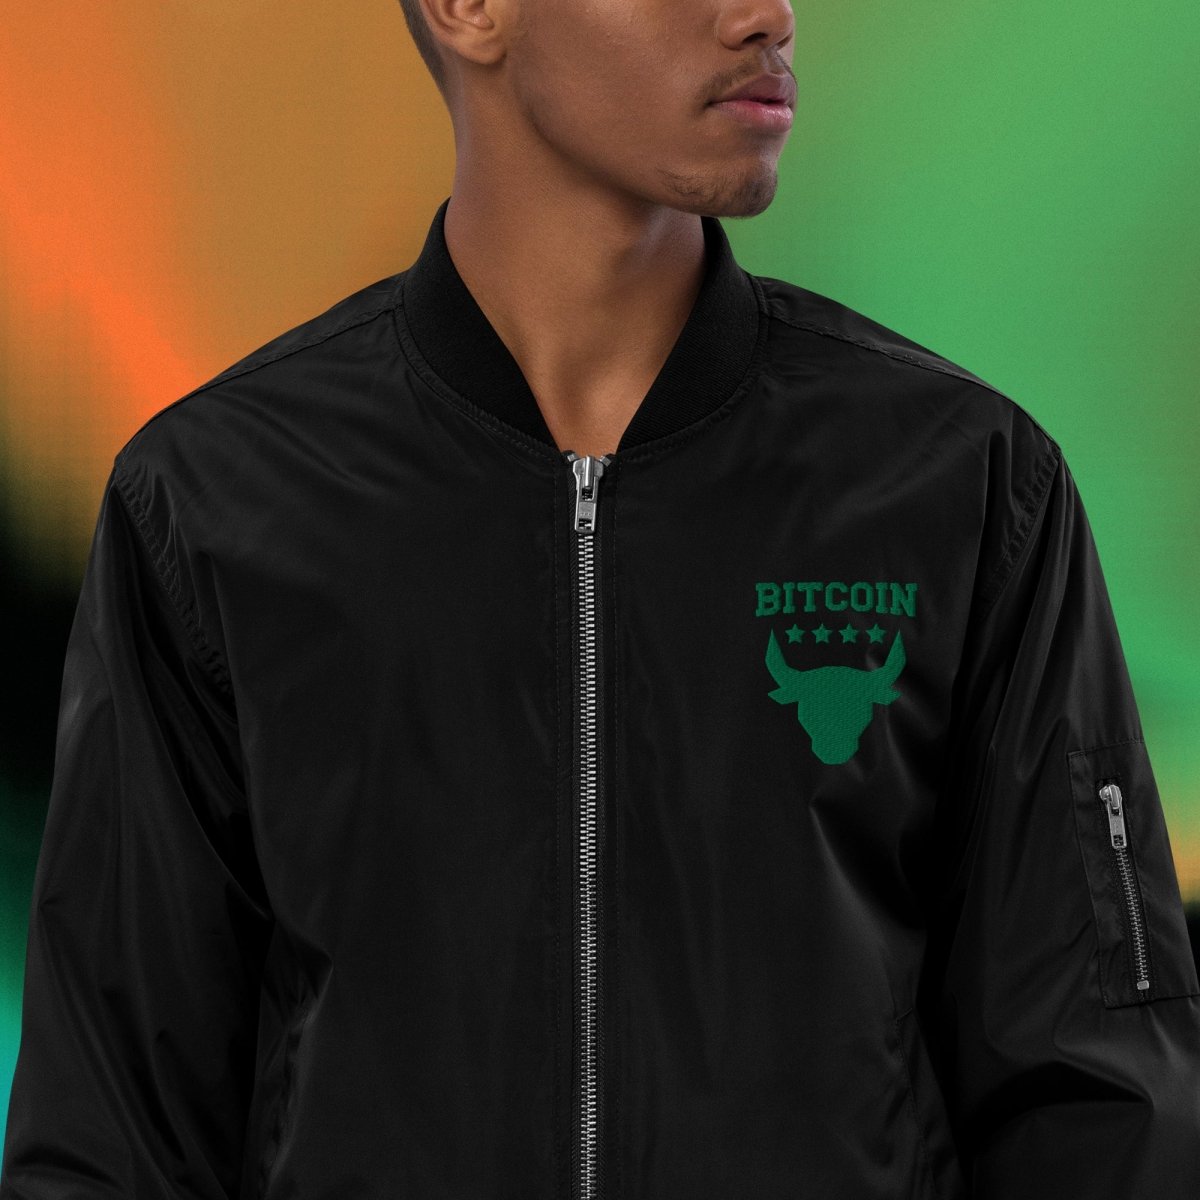 Bitcoin Merchandise - Bitcoin Bull Bomber Jacket worn by male model (front view). Available at NEONCRYPTO STORE.